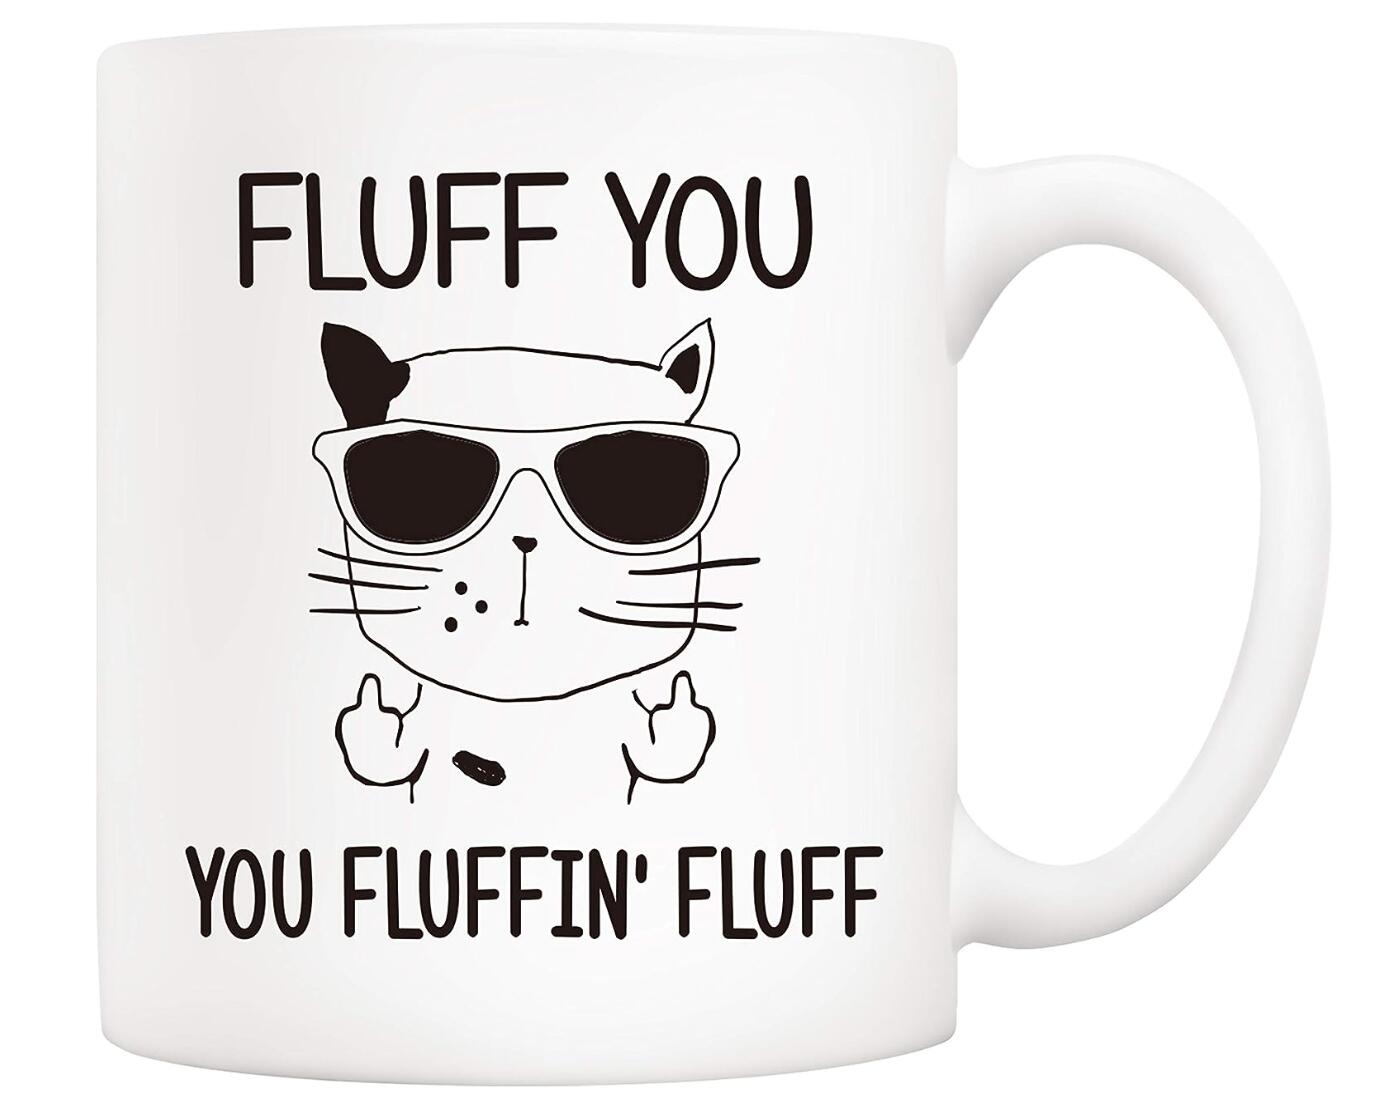 Fluff You Cat Coffee Mug Pet Lover Unique Birthday Gift Cup